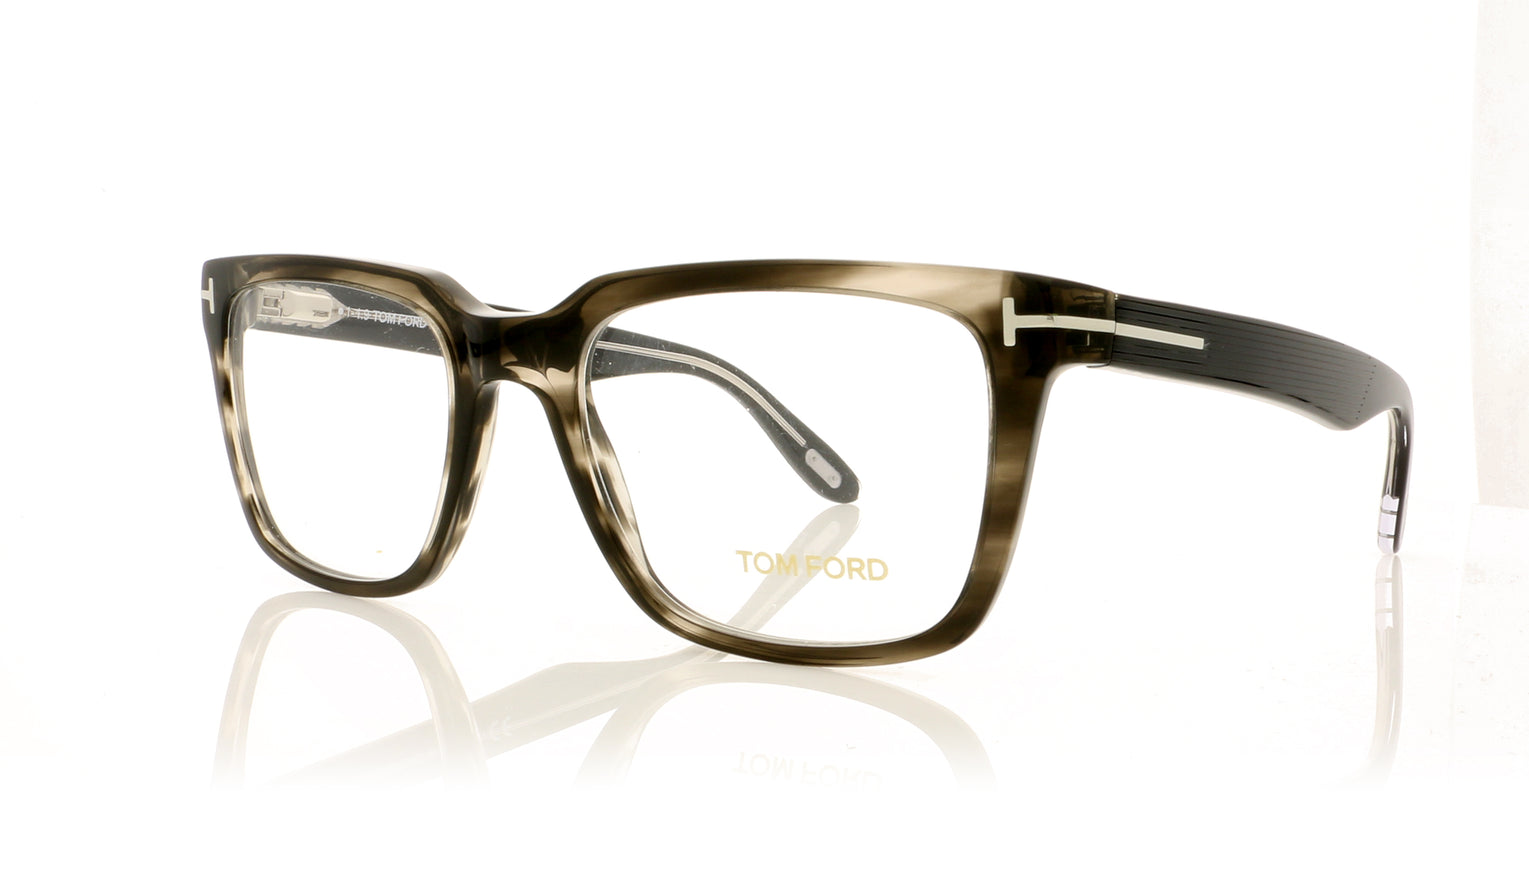 Tom Ford TF5304 93 Light Grey Glasses | The Eye Place